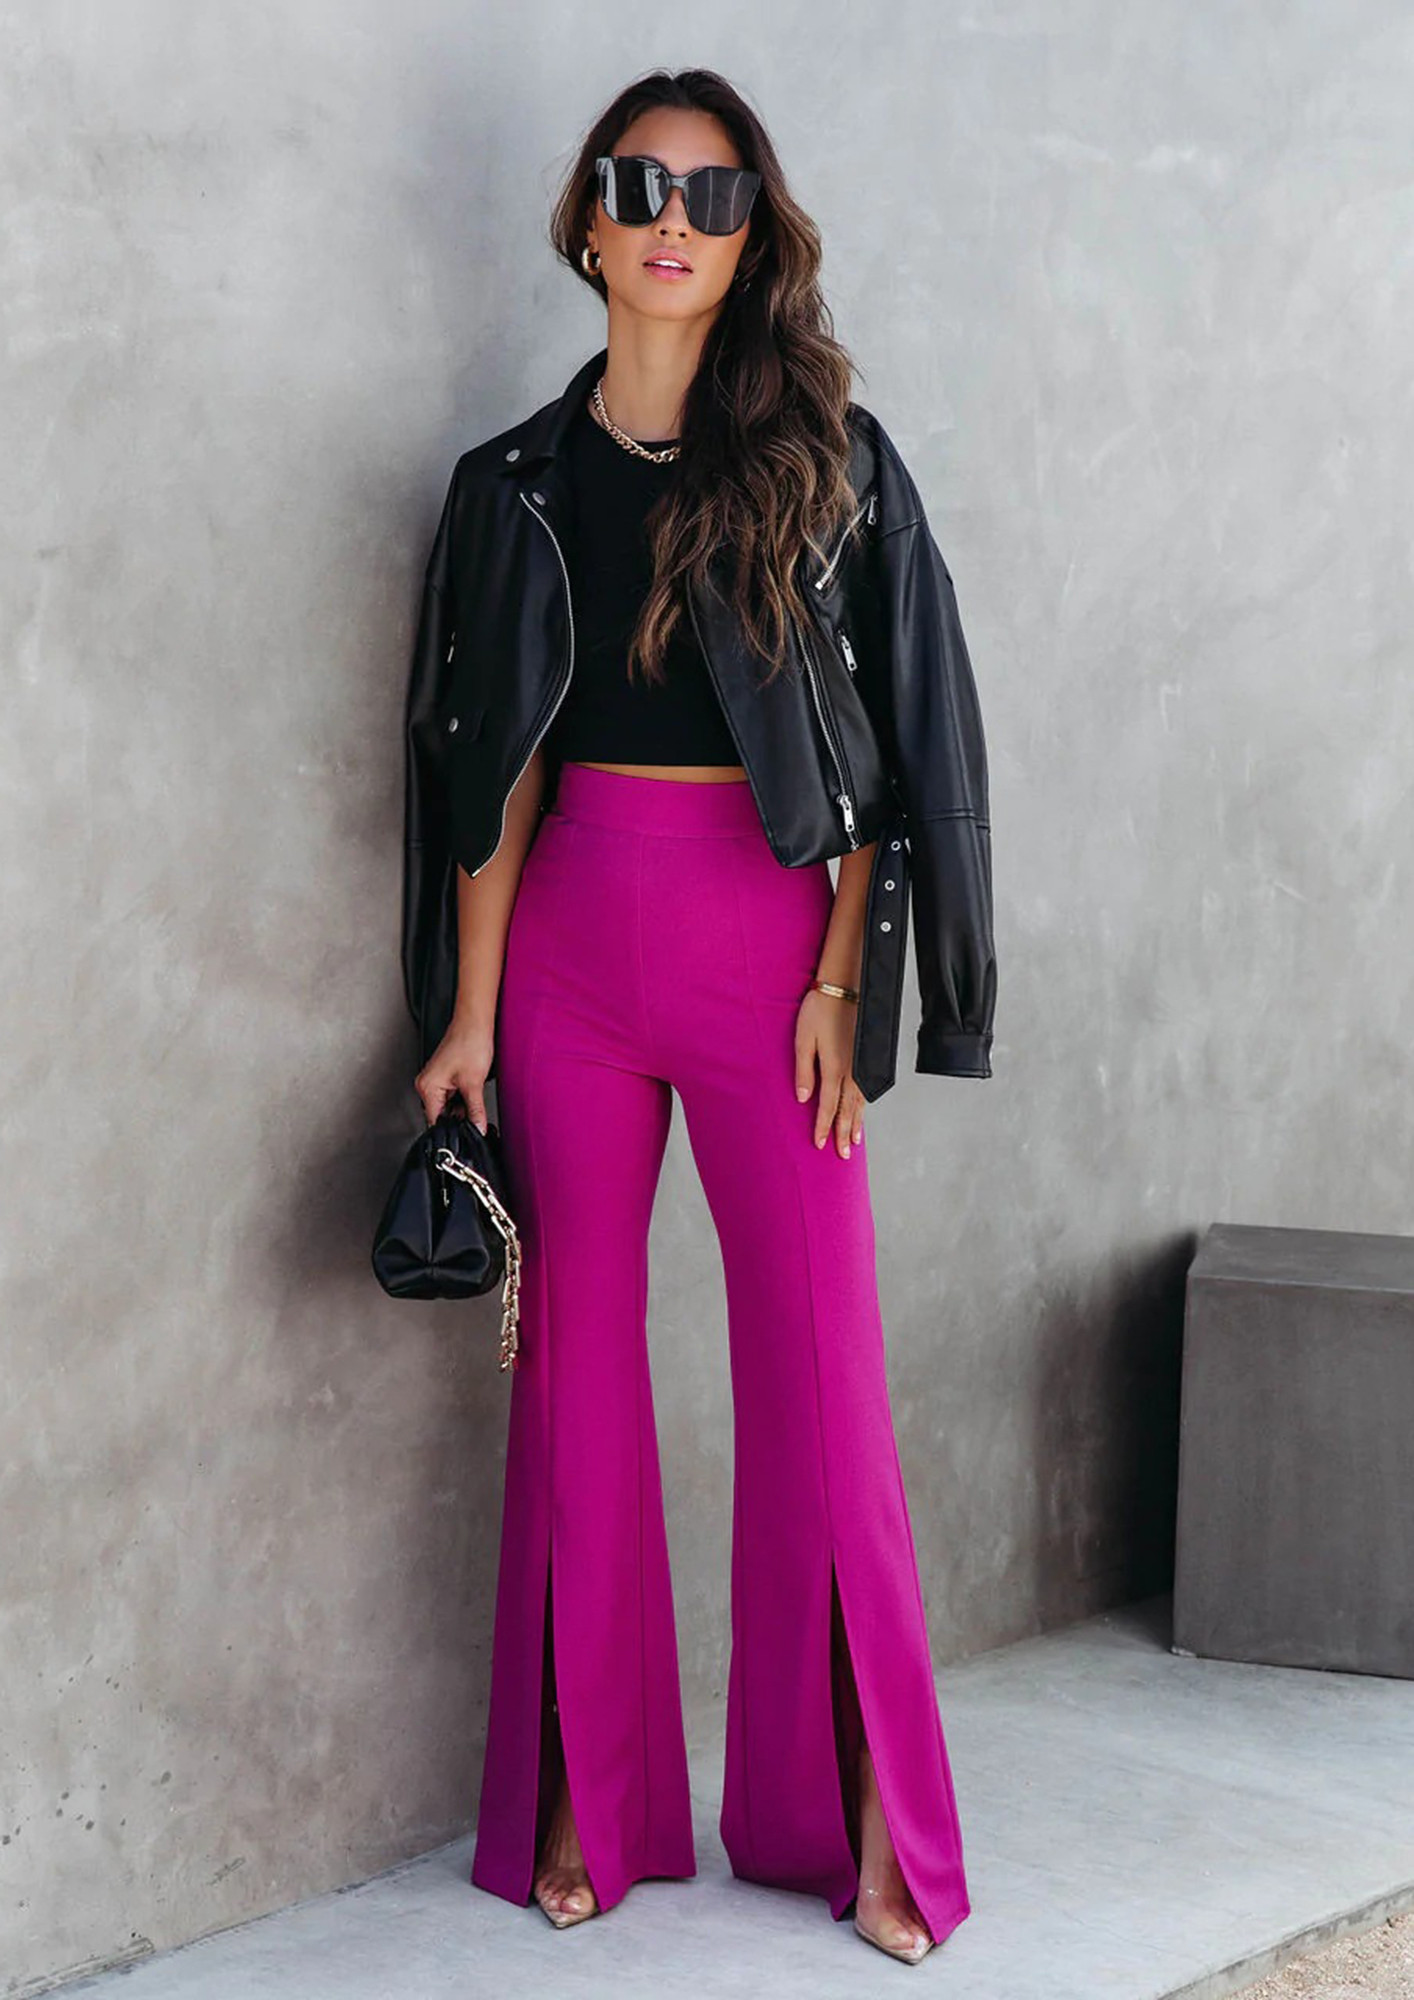 Flared trousers, pink